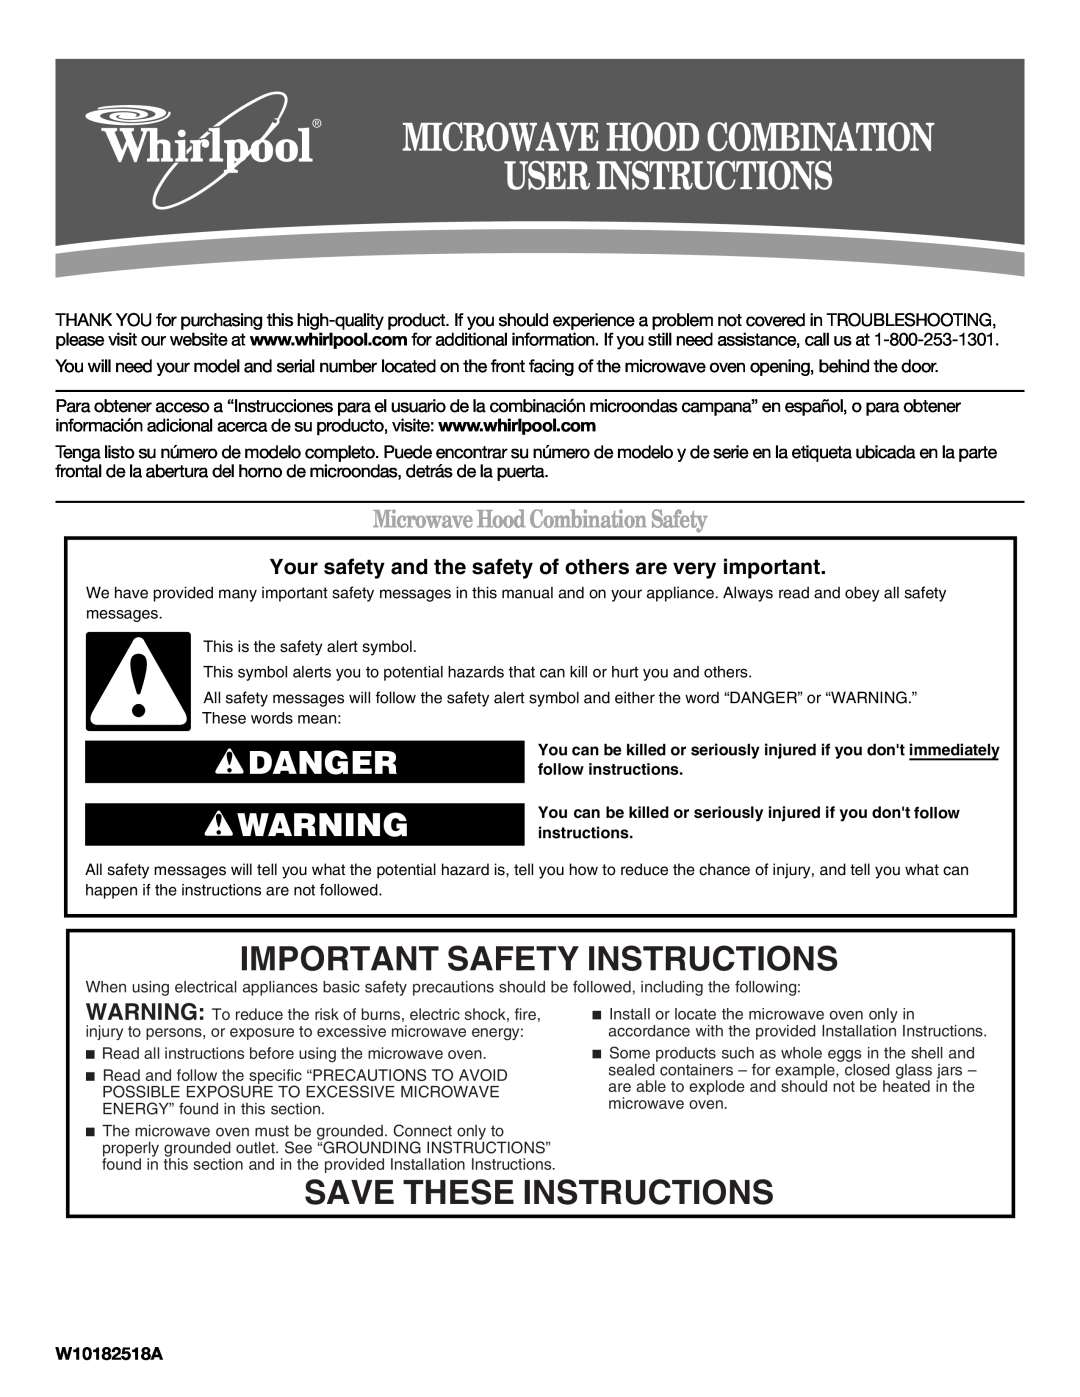 Whirlpool W10182518A important safety instructions Important Safety Instructions, Save These Instructions, Danger 